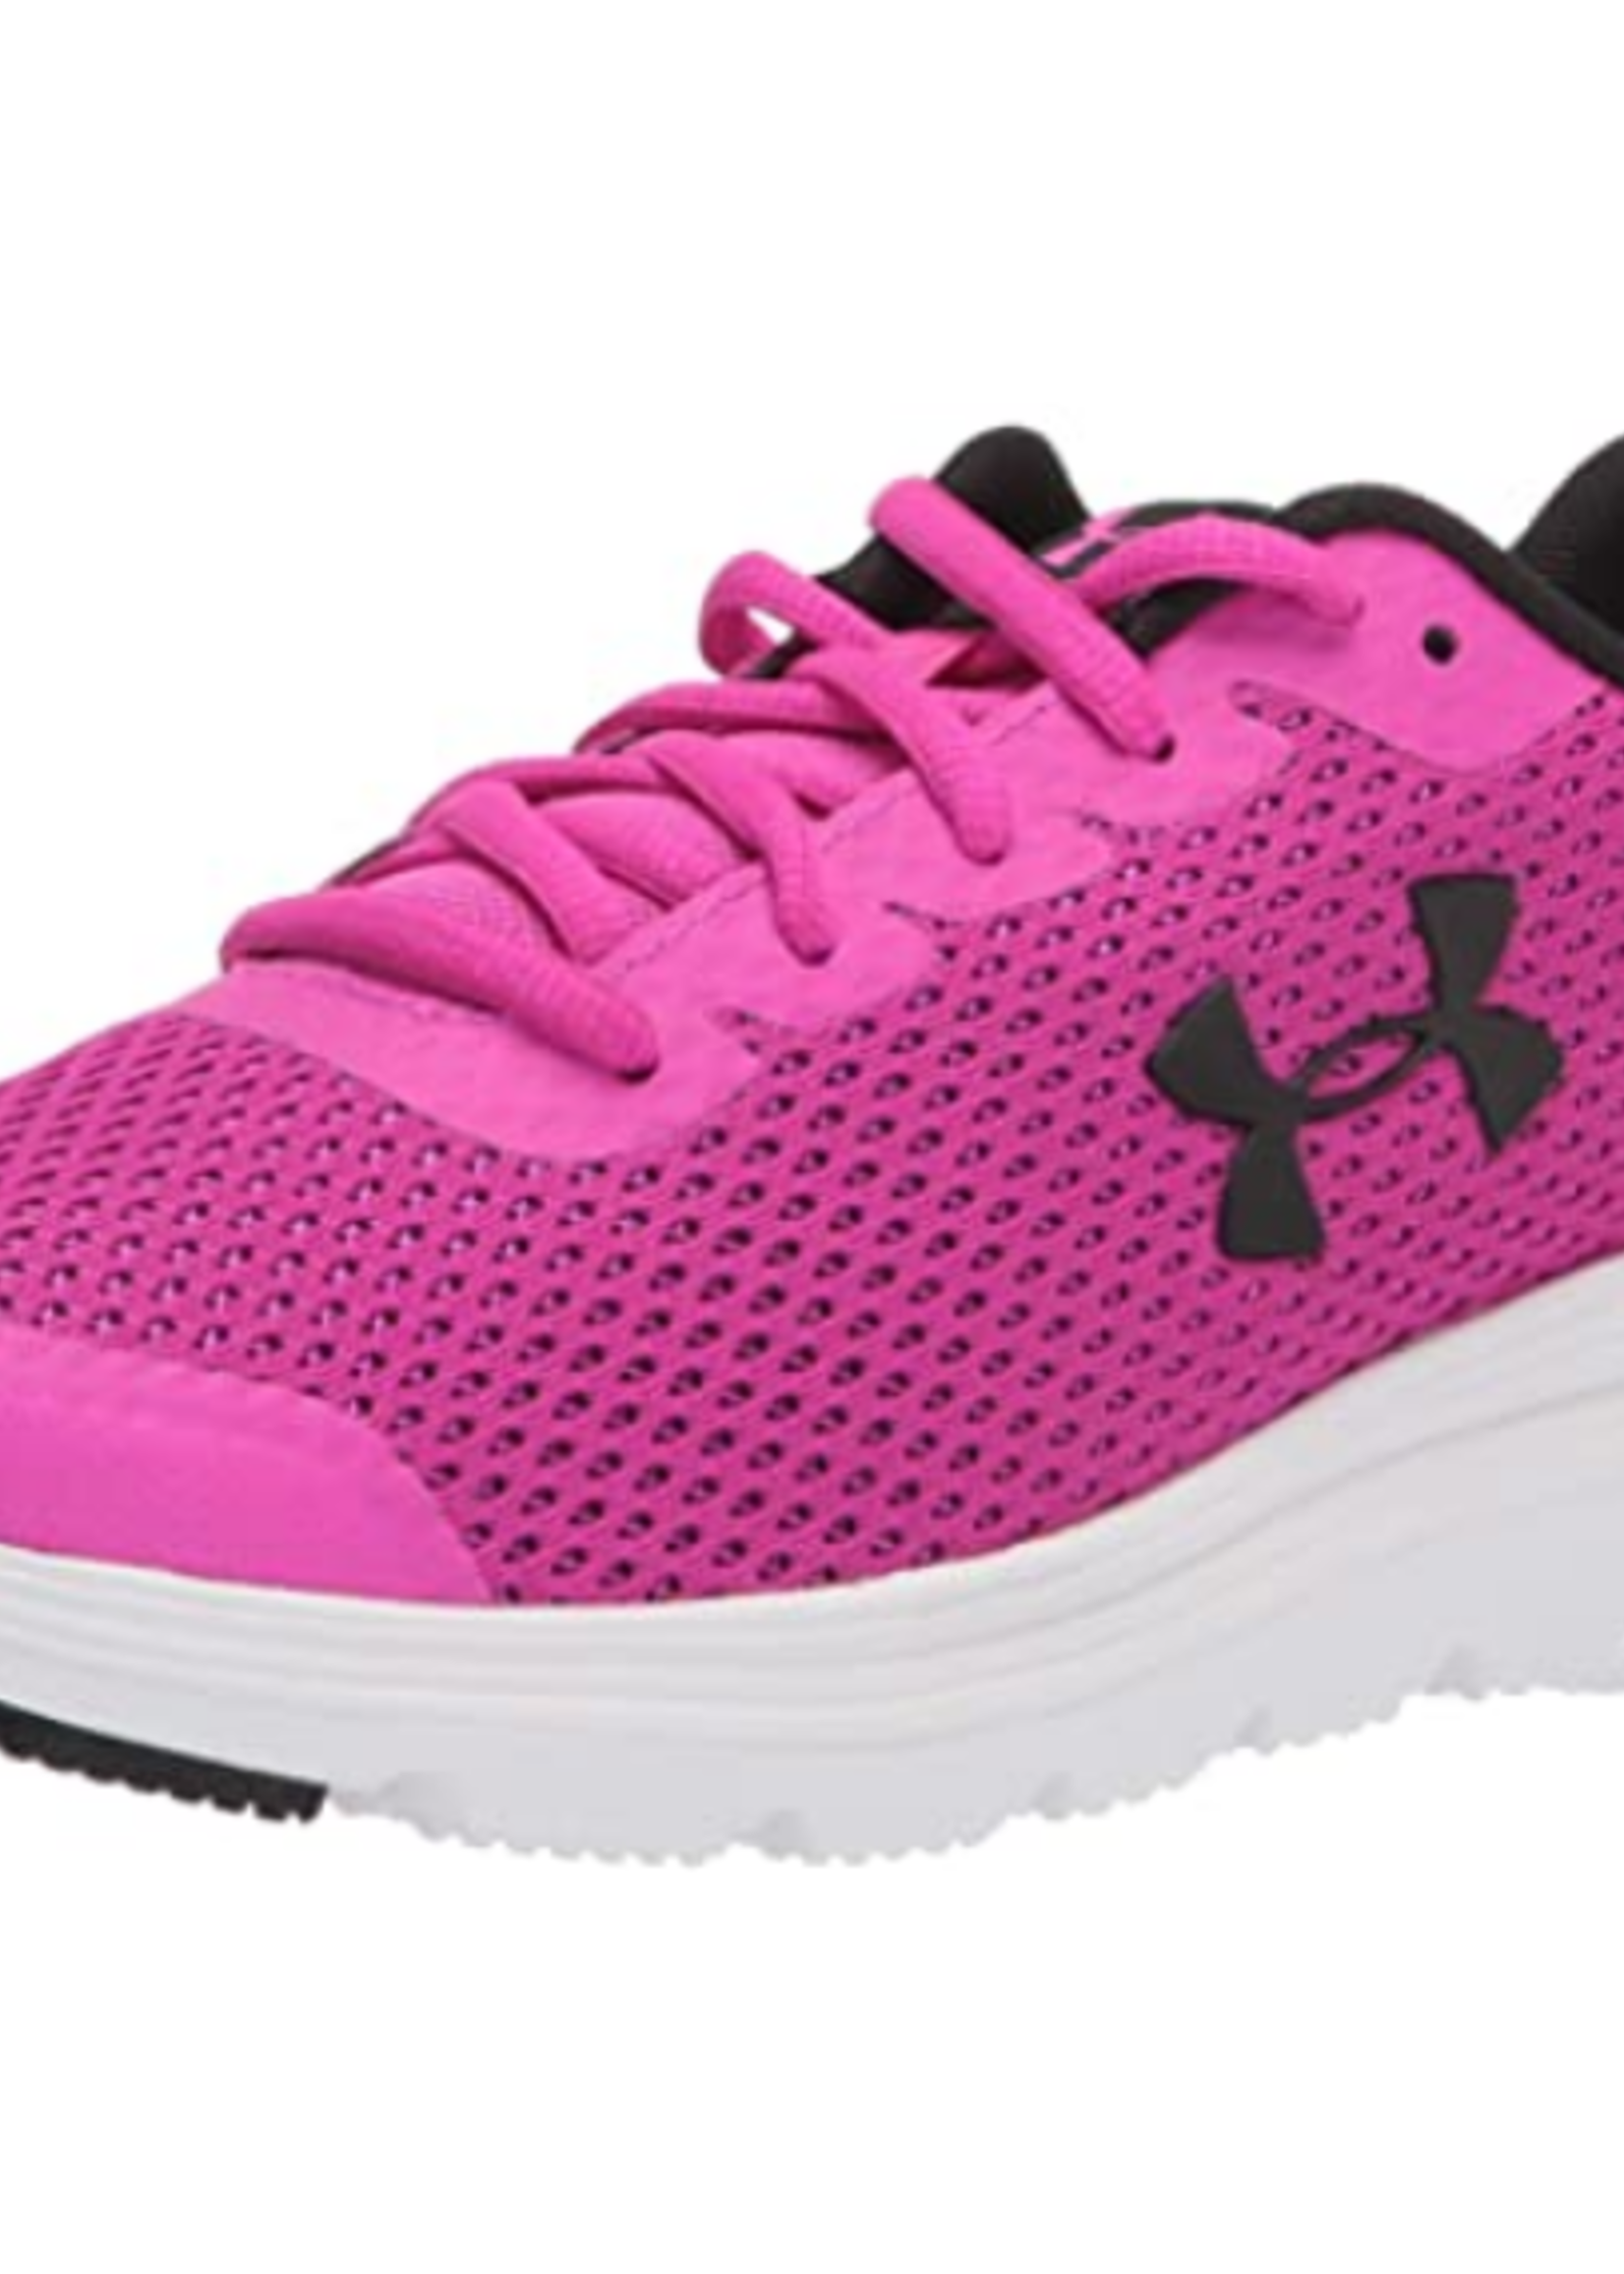 Under Armour WOMEN'S UA SURGE 2 RUNNING SHOES 3022605